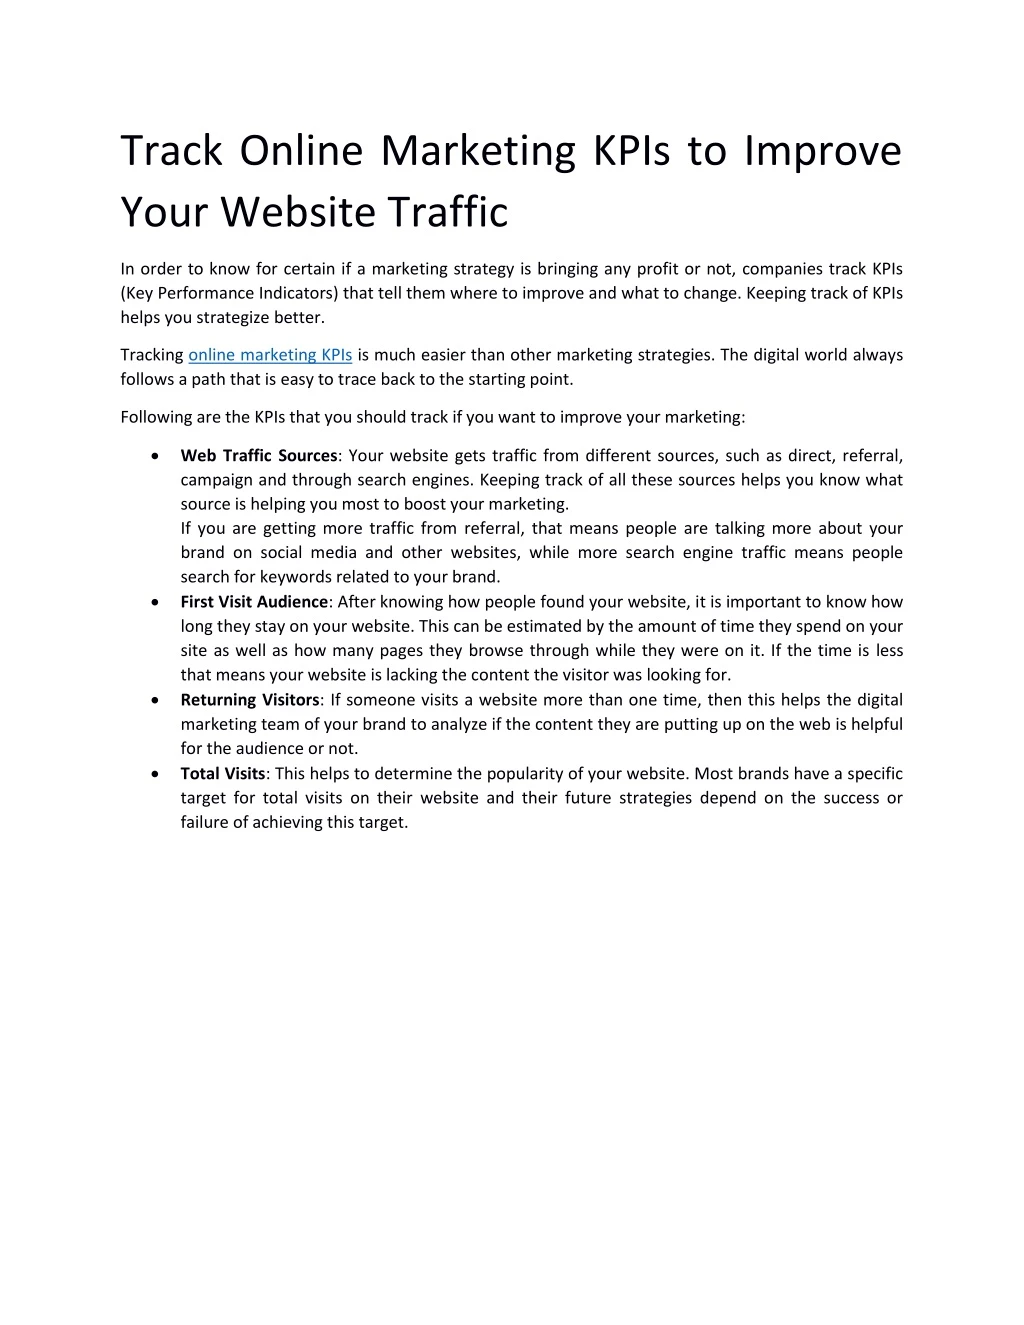 track online marketing kpis to improve your